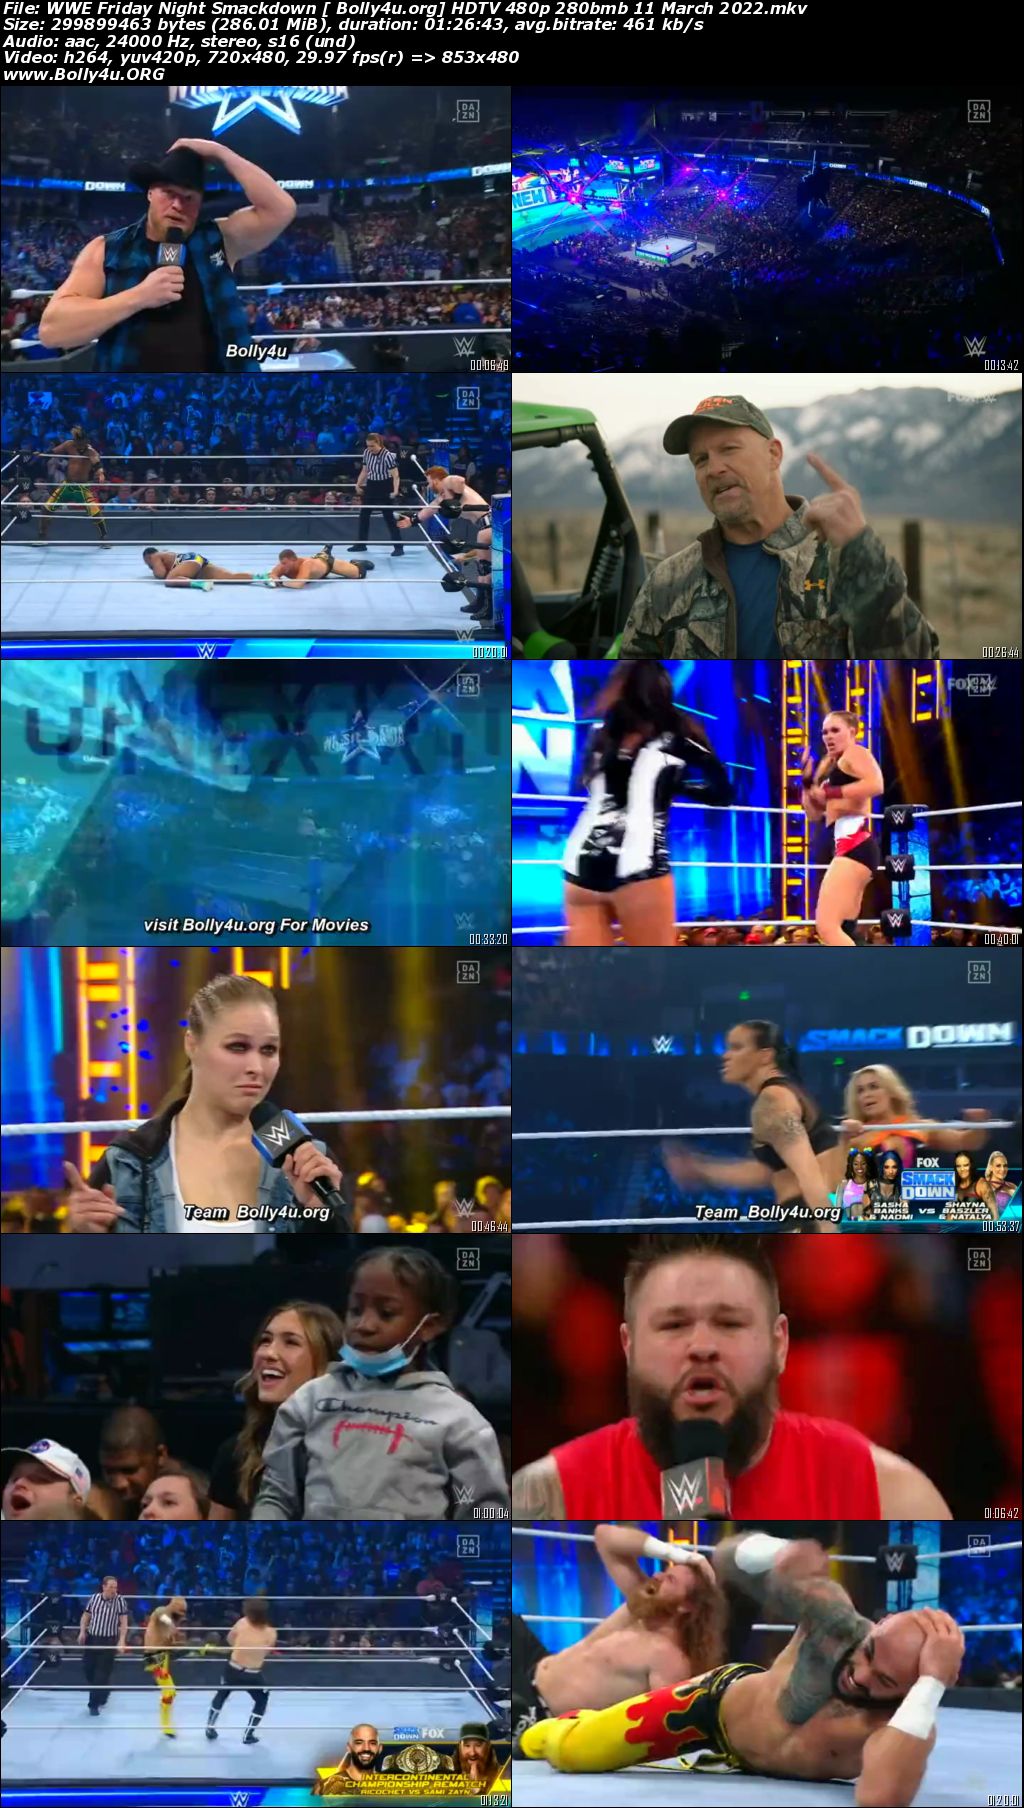 WWE Friday Night Smackdown HDTV 480p 280bmb 11 March 2022 Download